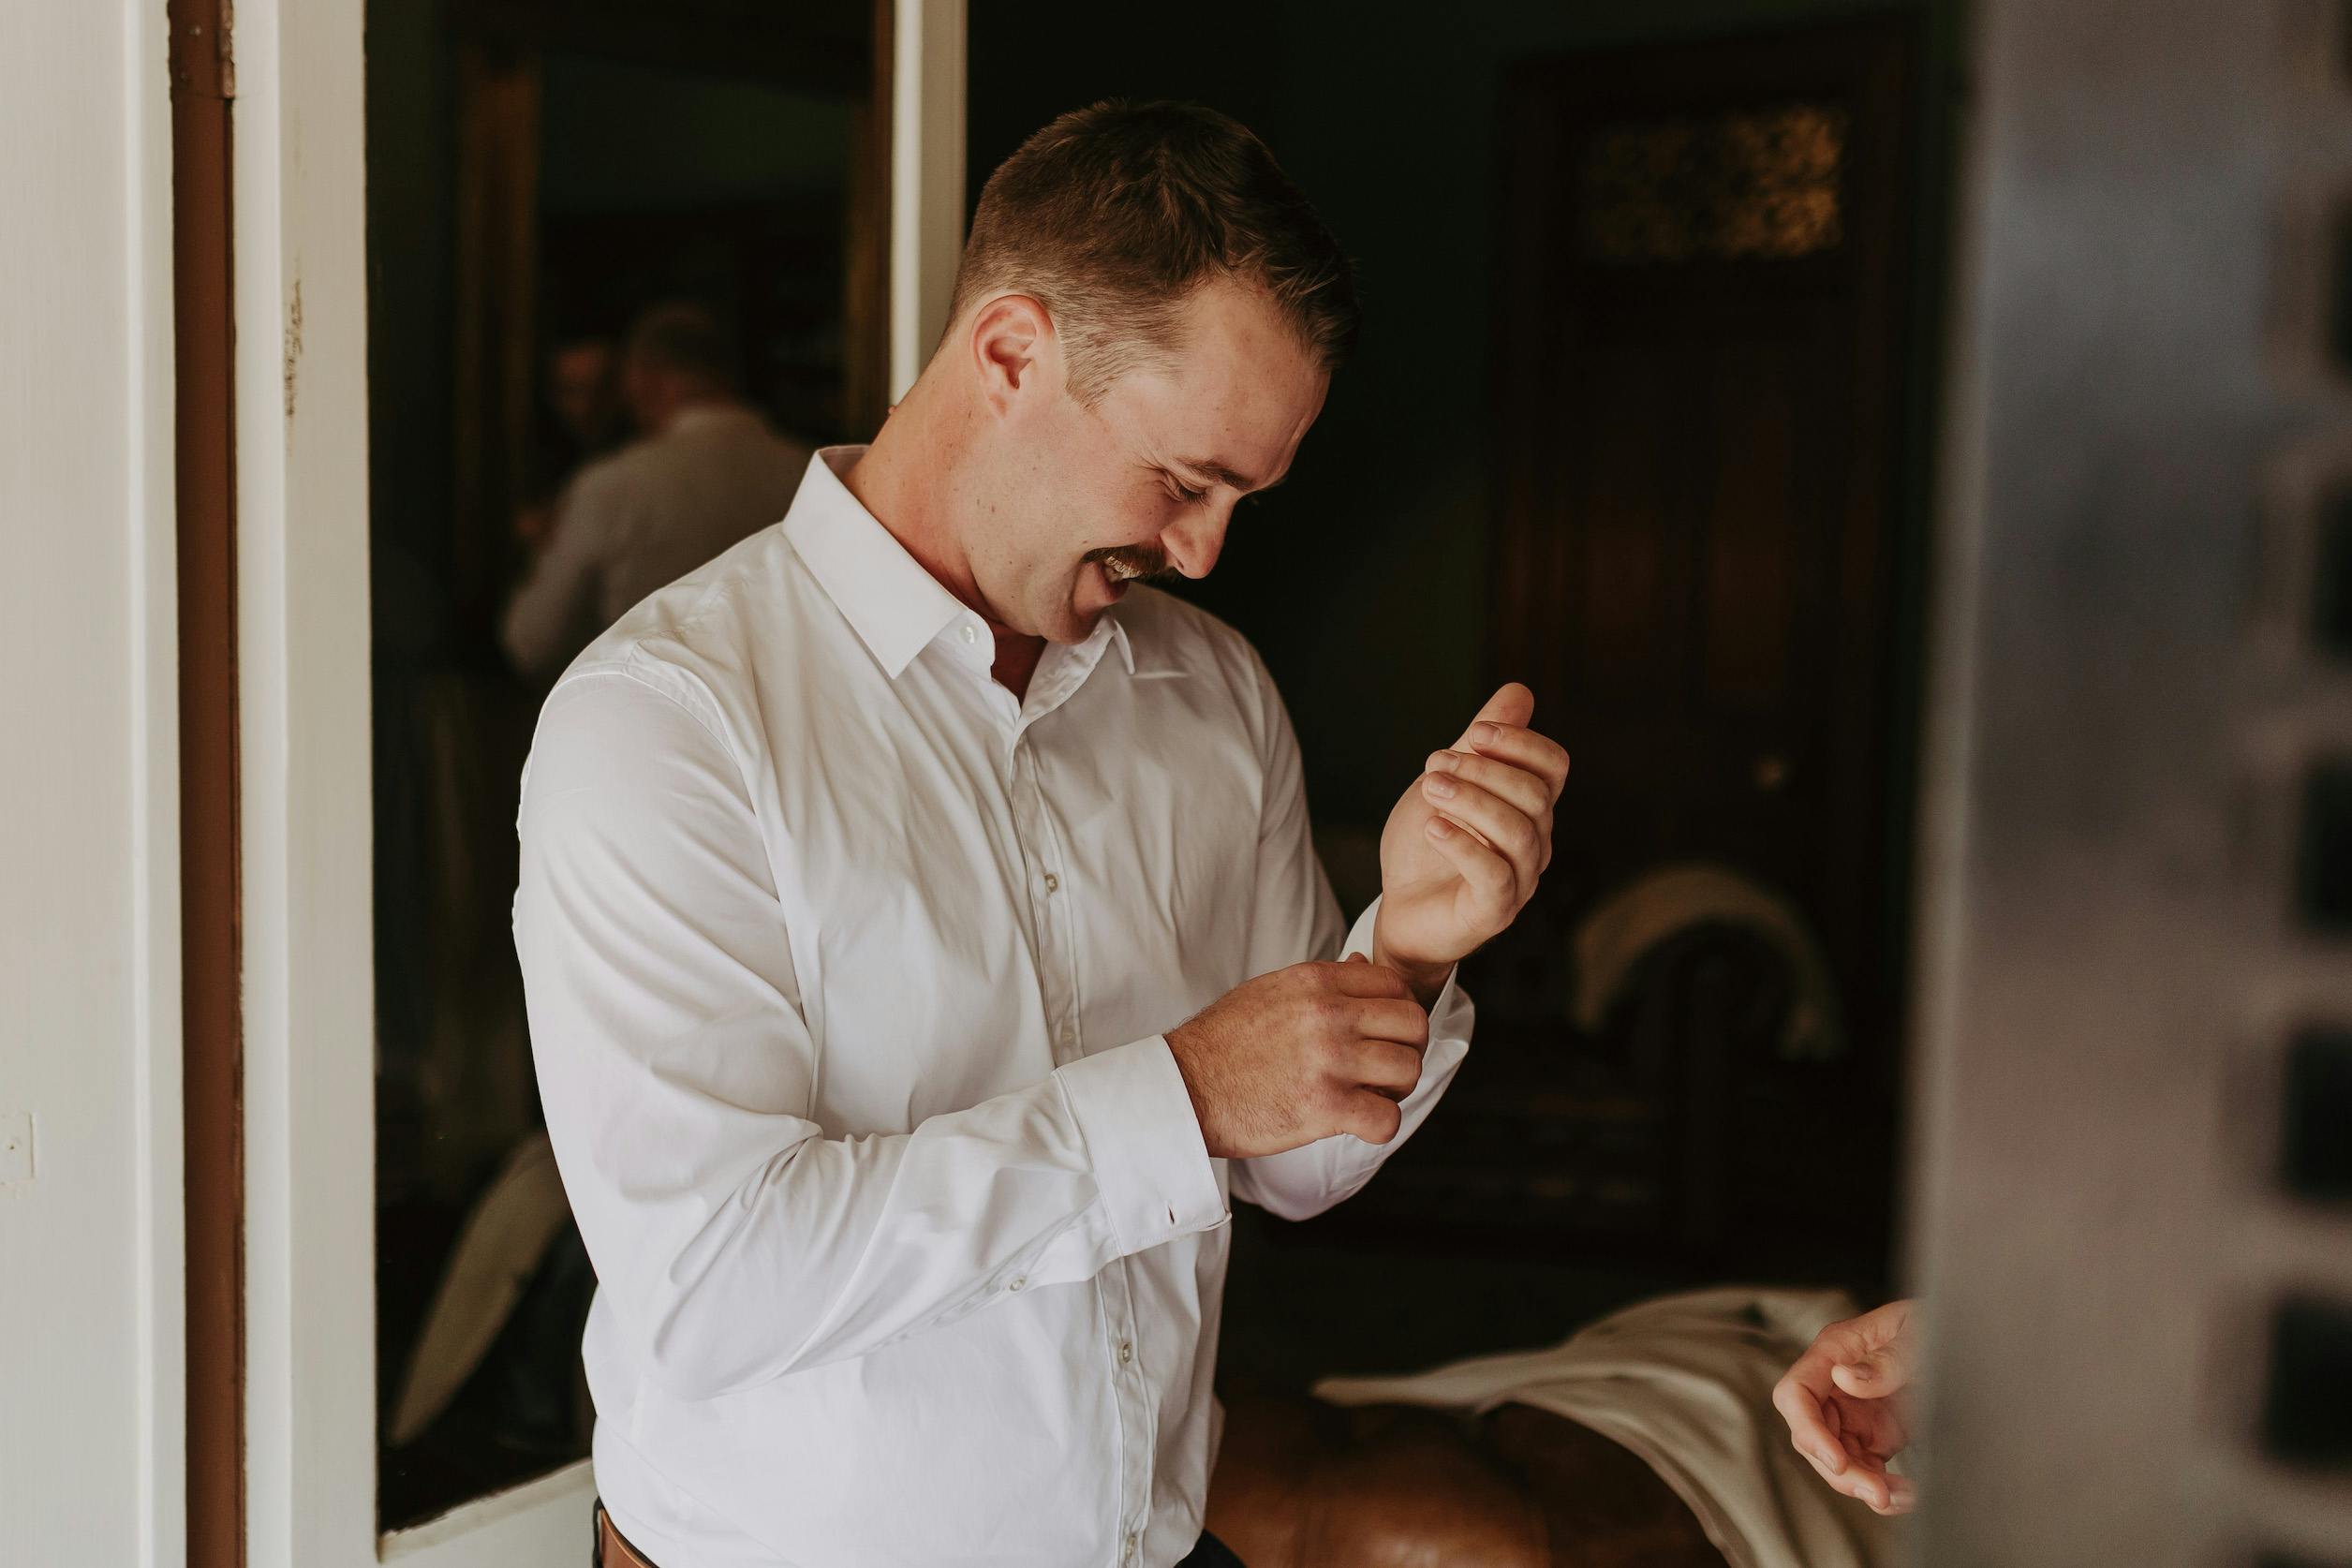 A man stands in a room adjusting the cuff of his white shirt with a slight smile. He has short hair and is dressed neatly. The room's background includes a mirror and a wooden door, with soft indoor lighting enhancing the warm atmosphere.